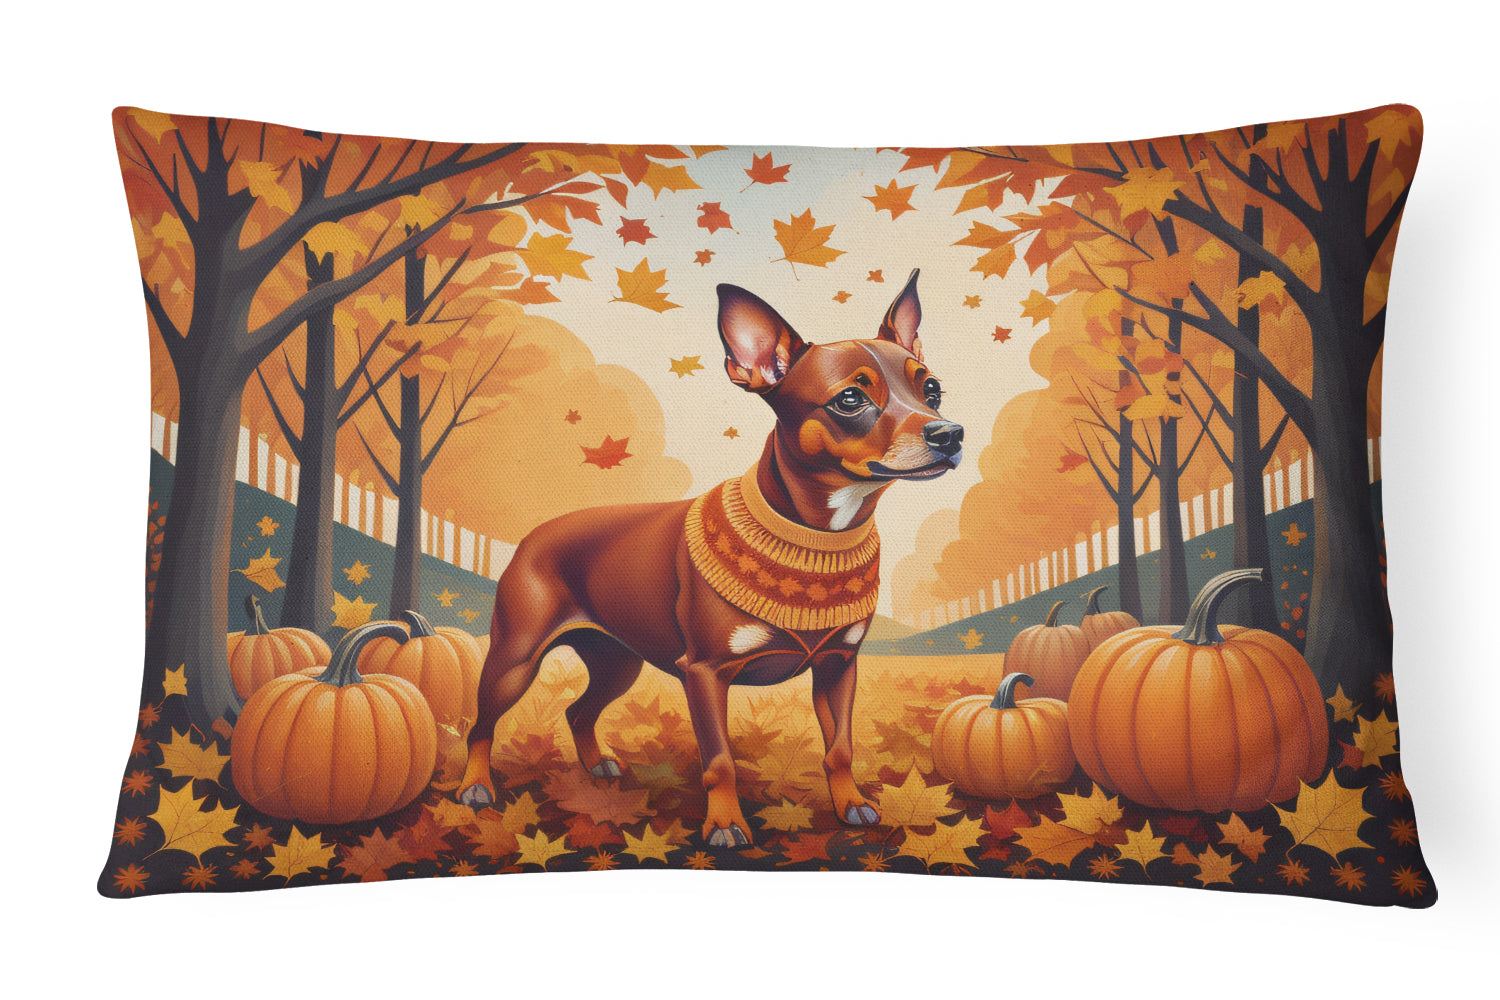 Buy this Red Miniature Pinscher Fall Fabric Decorative Pillow